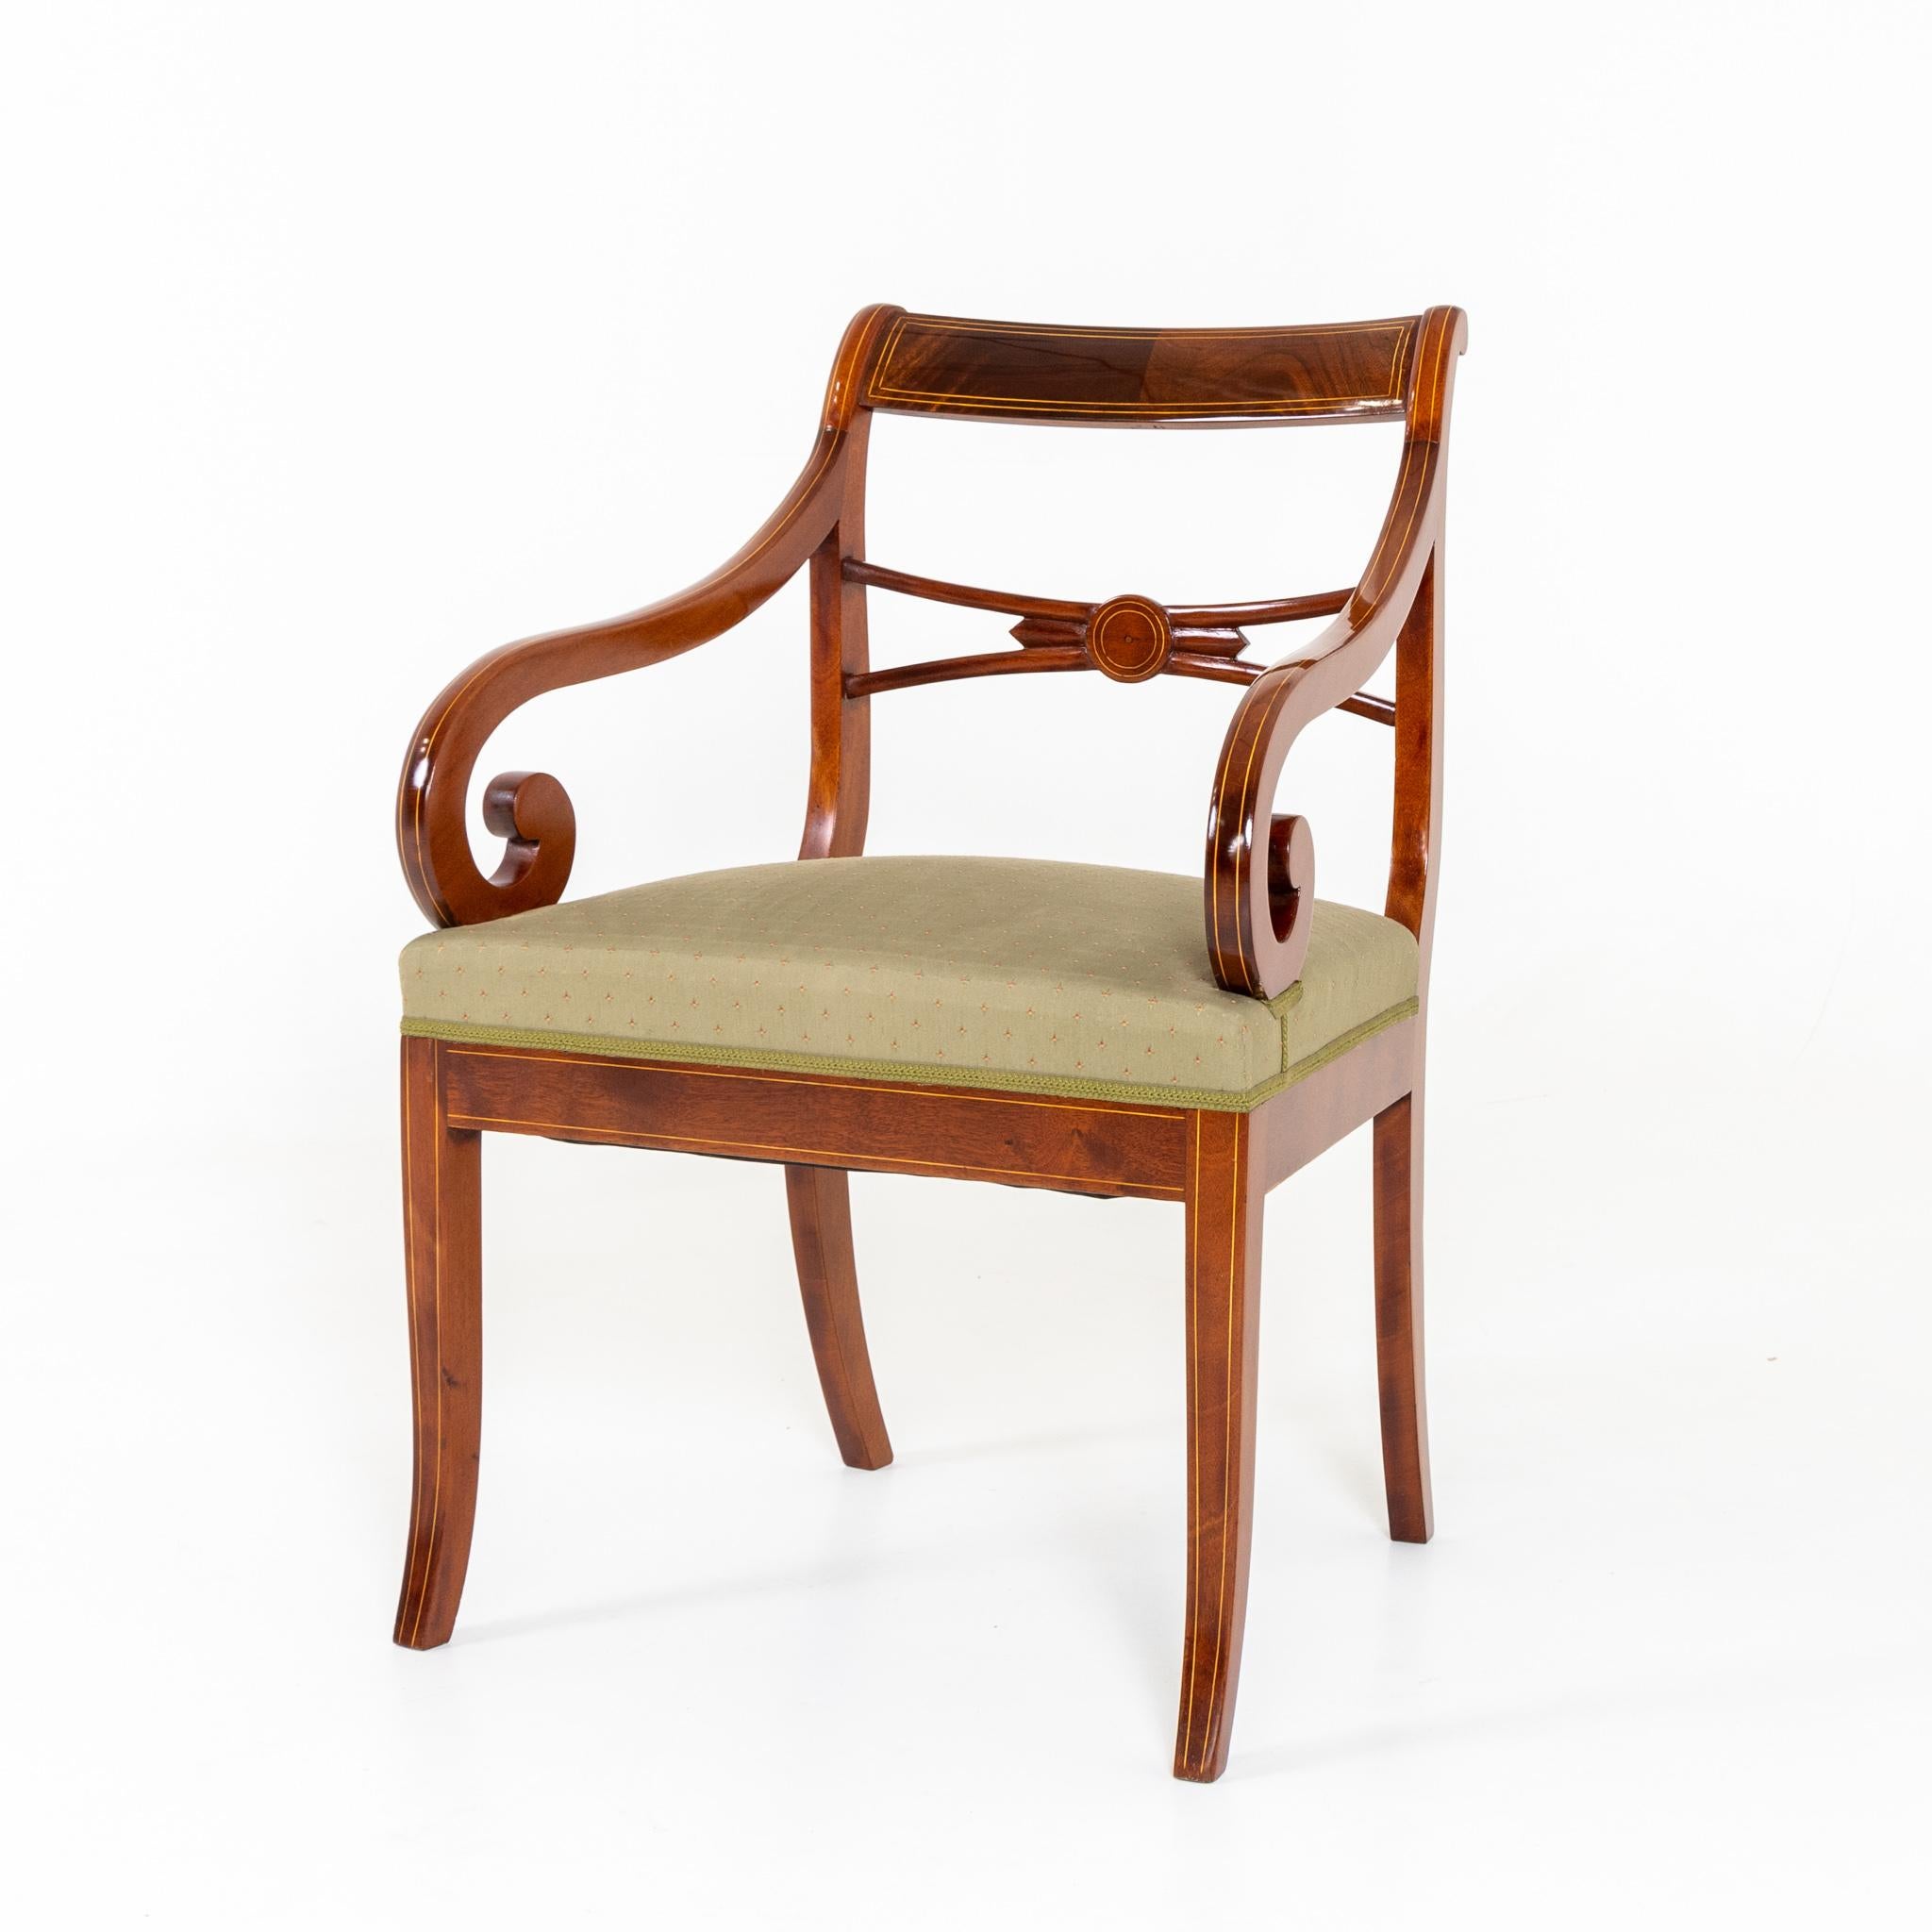 Mahogany armchair with fine thread inlays and volute shaped armrests, hand polished.